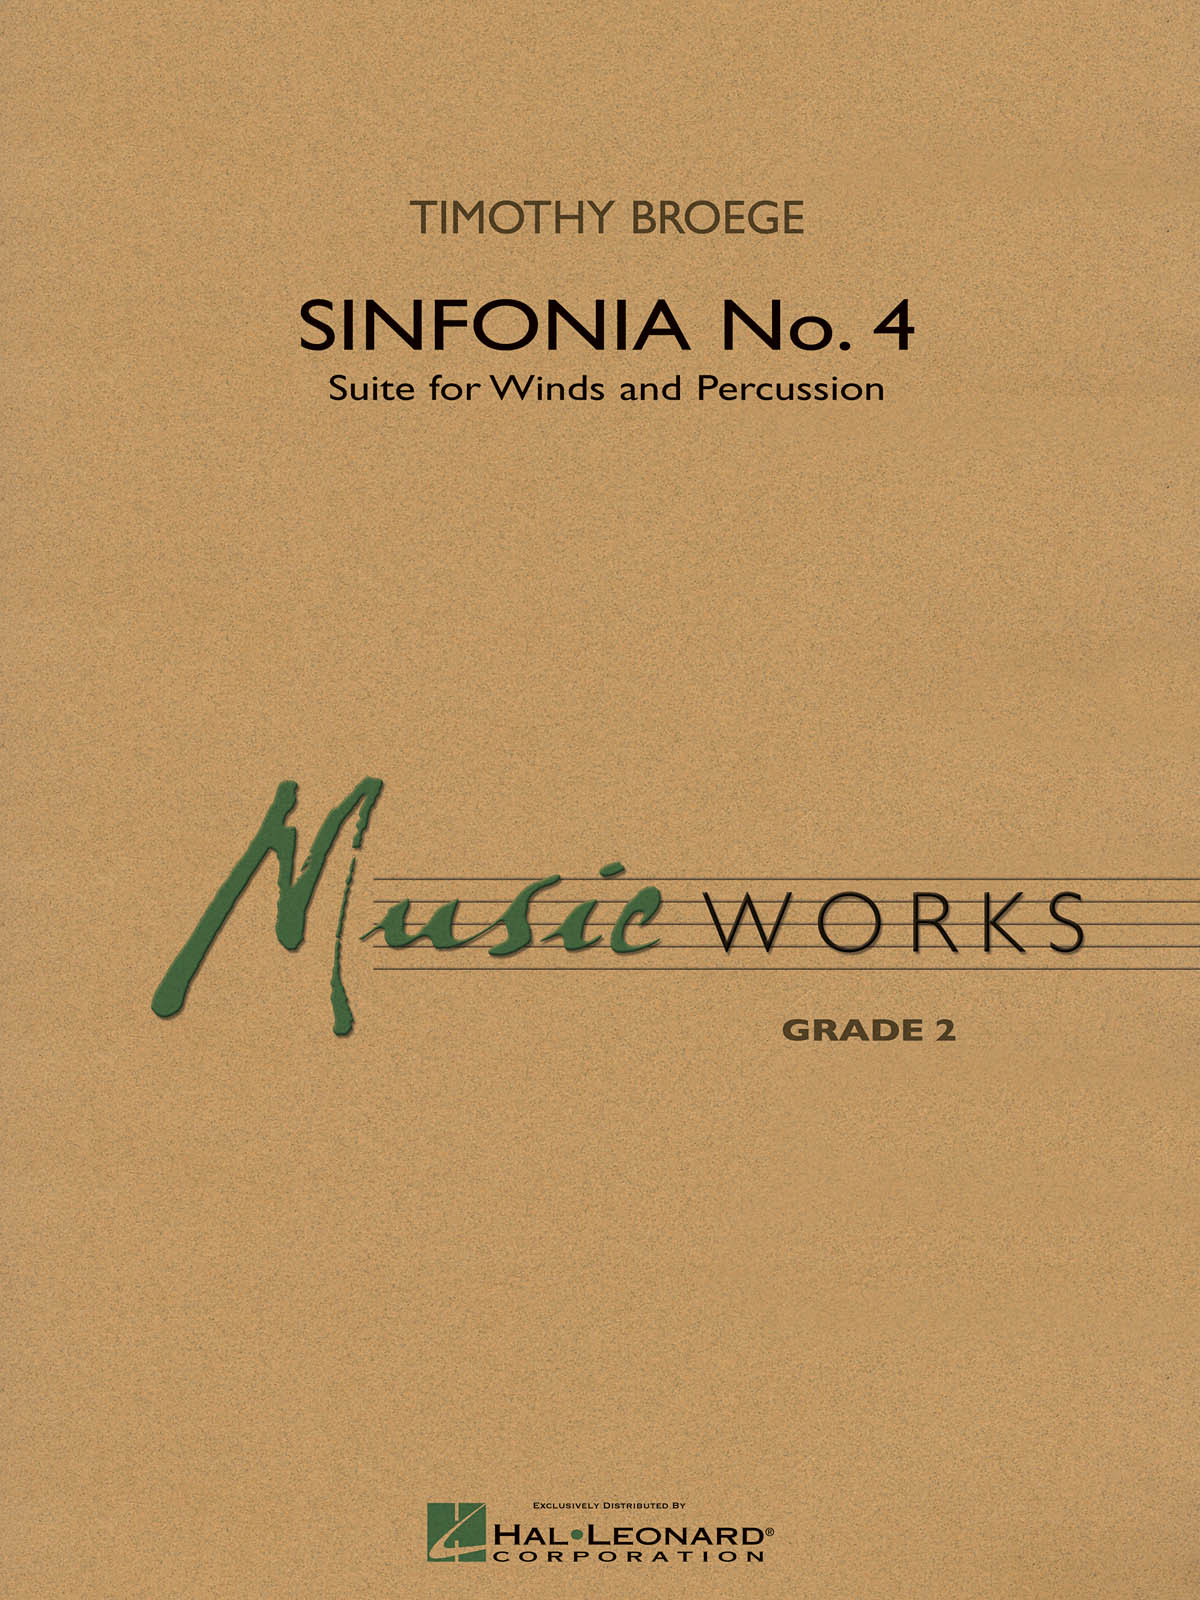 Timothy Broege: Sinfonia No. 4: Concert Band: Score